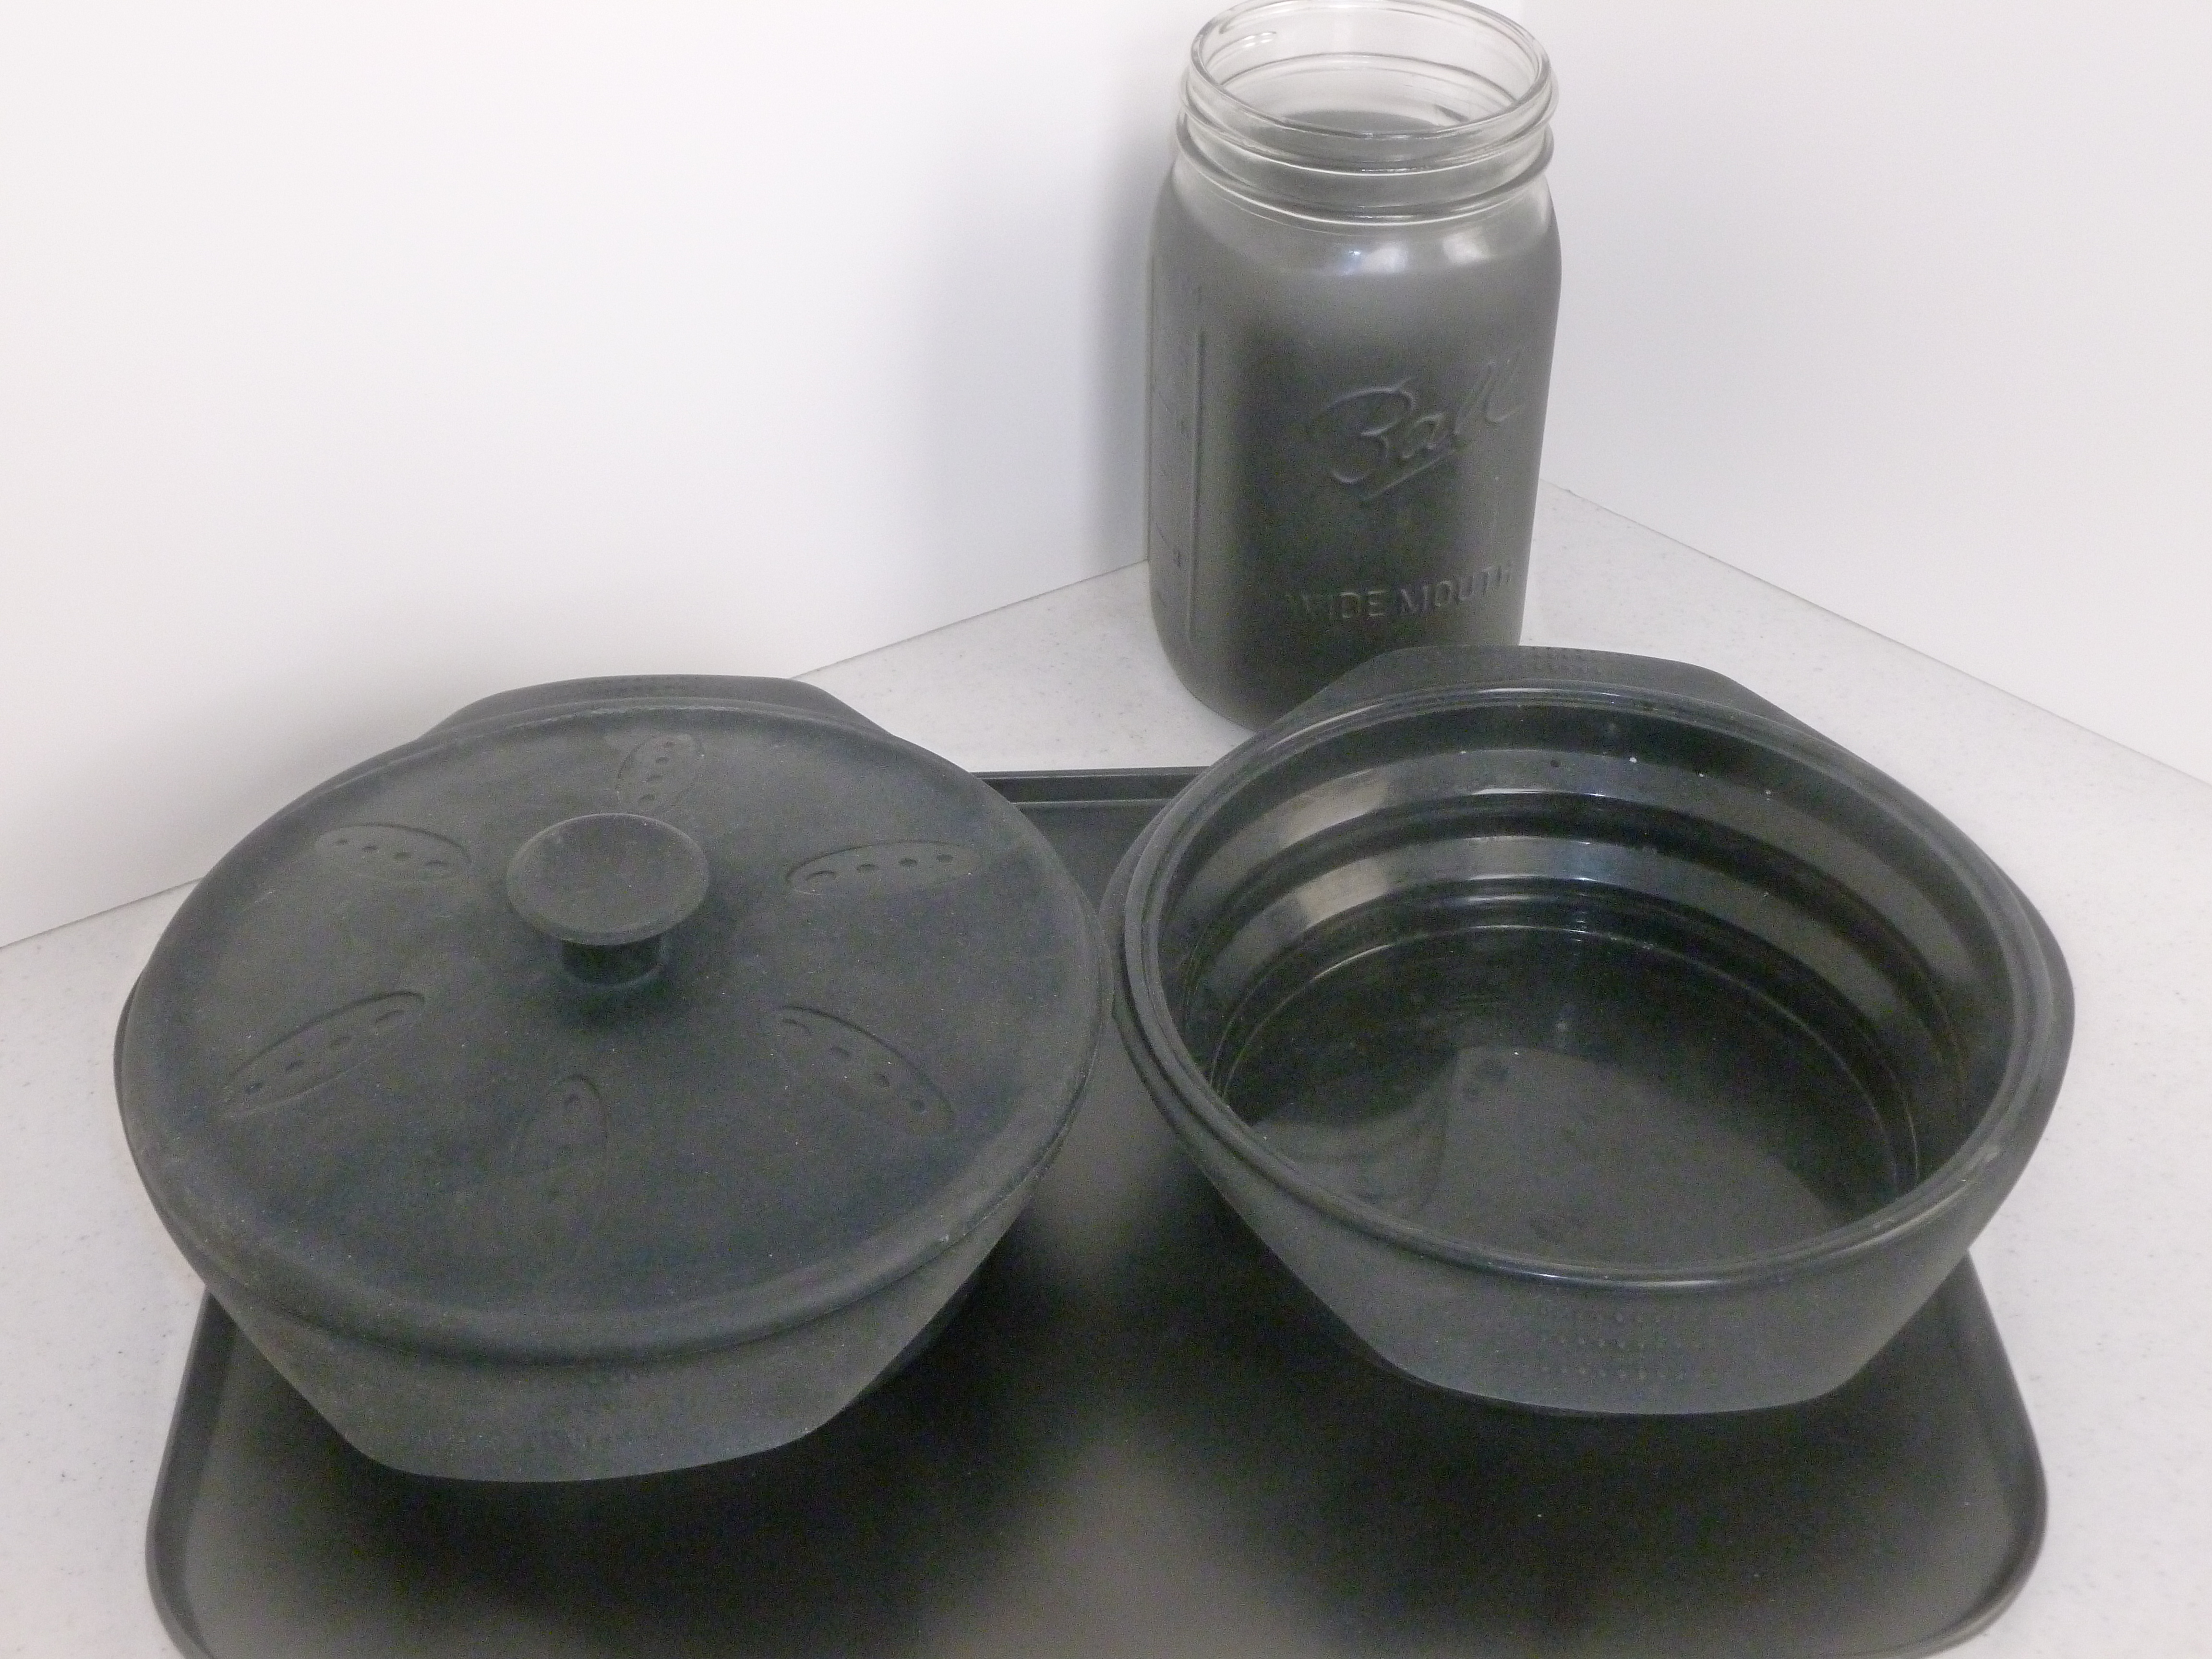 Black Silicon pots, black cookie sheet, black painted canning jar Cookware Guide for solar oven cooking